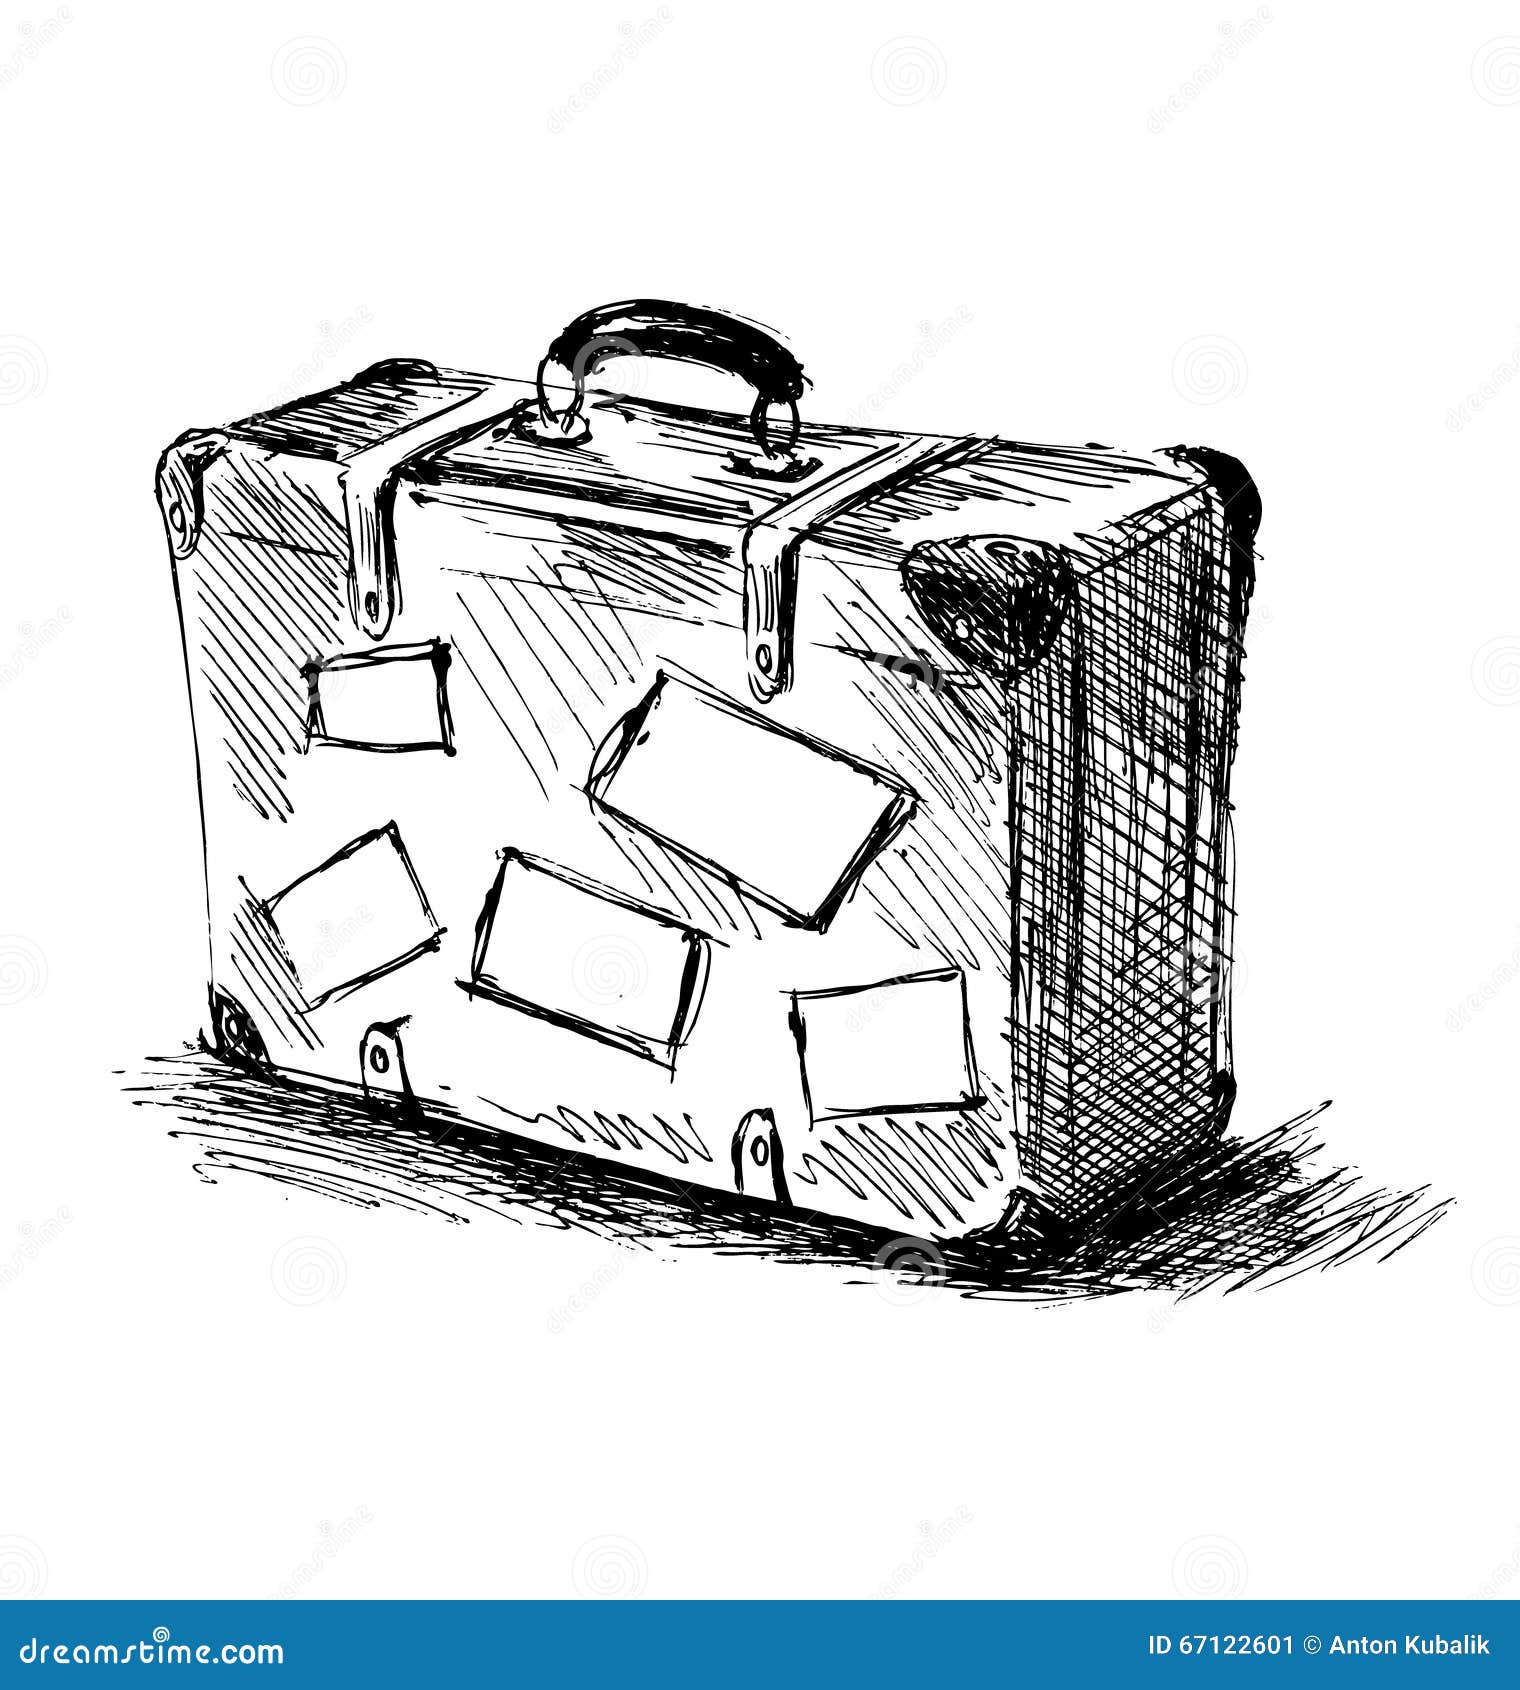 How to Draw a Cute Suitcase Easy Beginner Guide